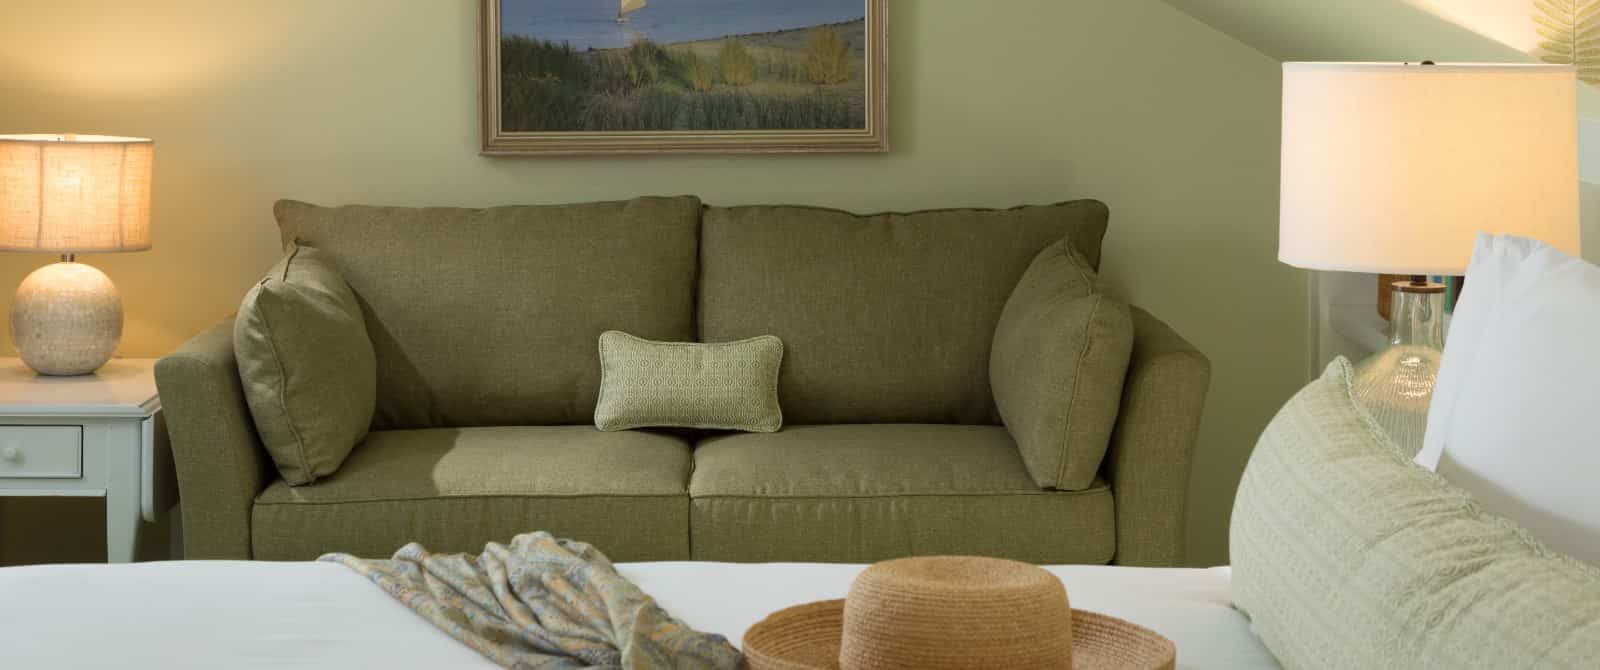 Bedroom sitting area with light green upholstered loveseat and white end table